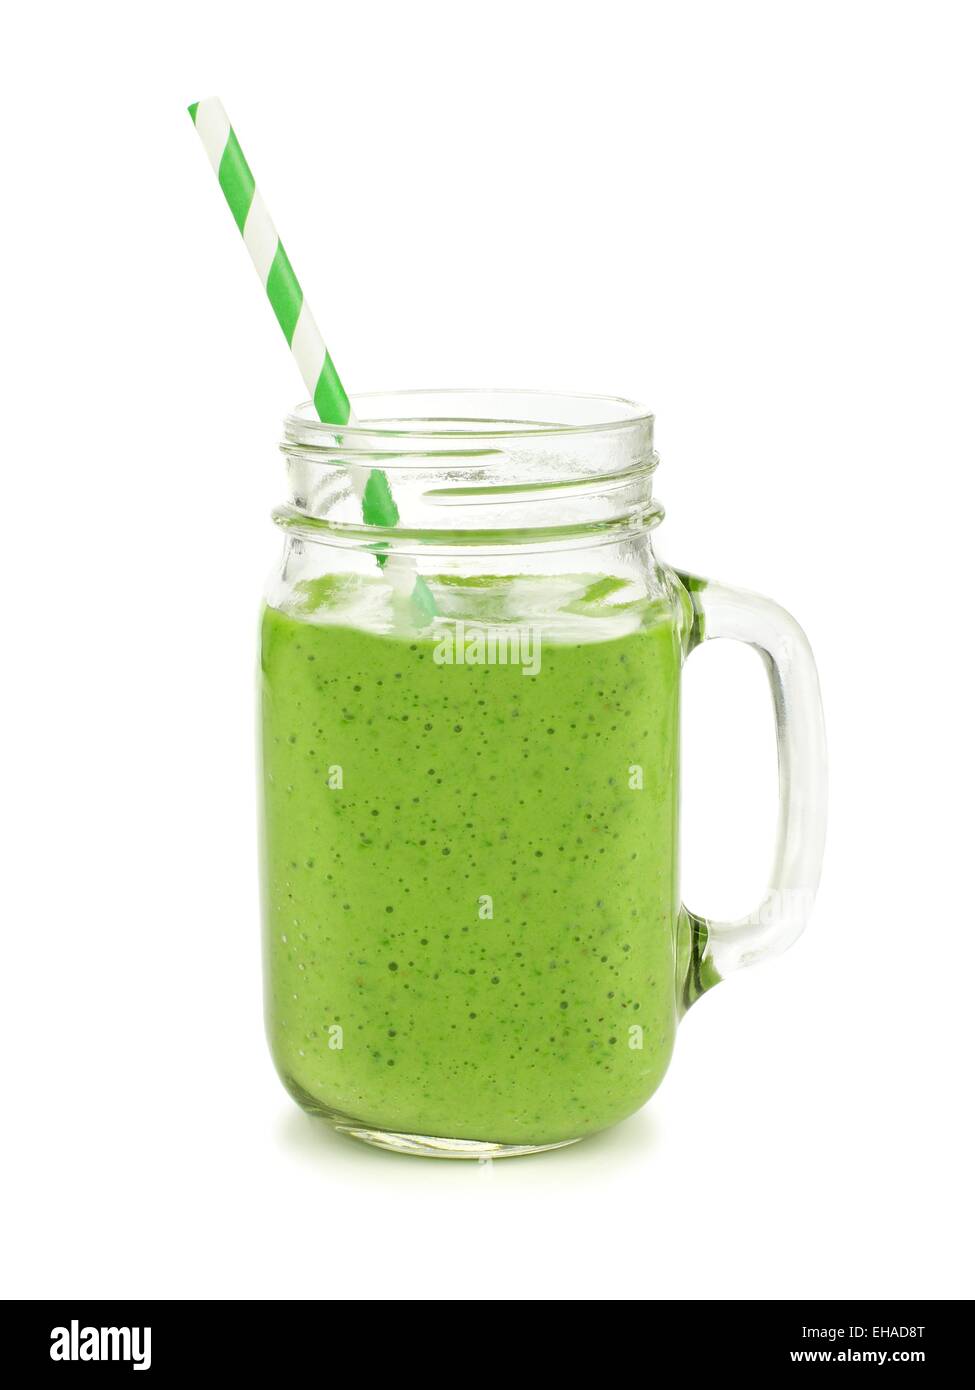 Healthy green smoothie with straw in a jar mug isolated on white Stock Photo